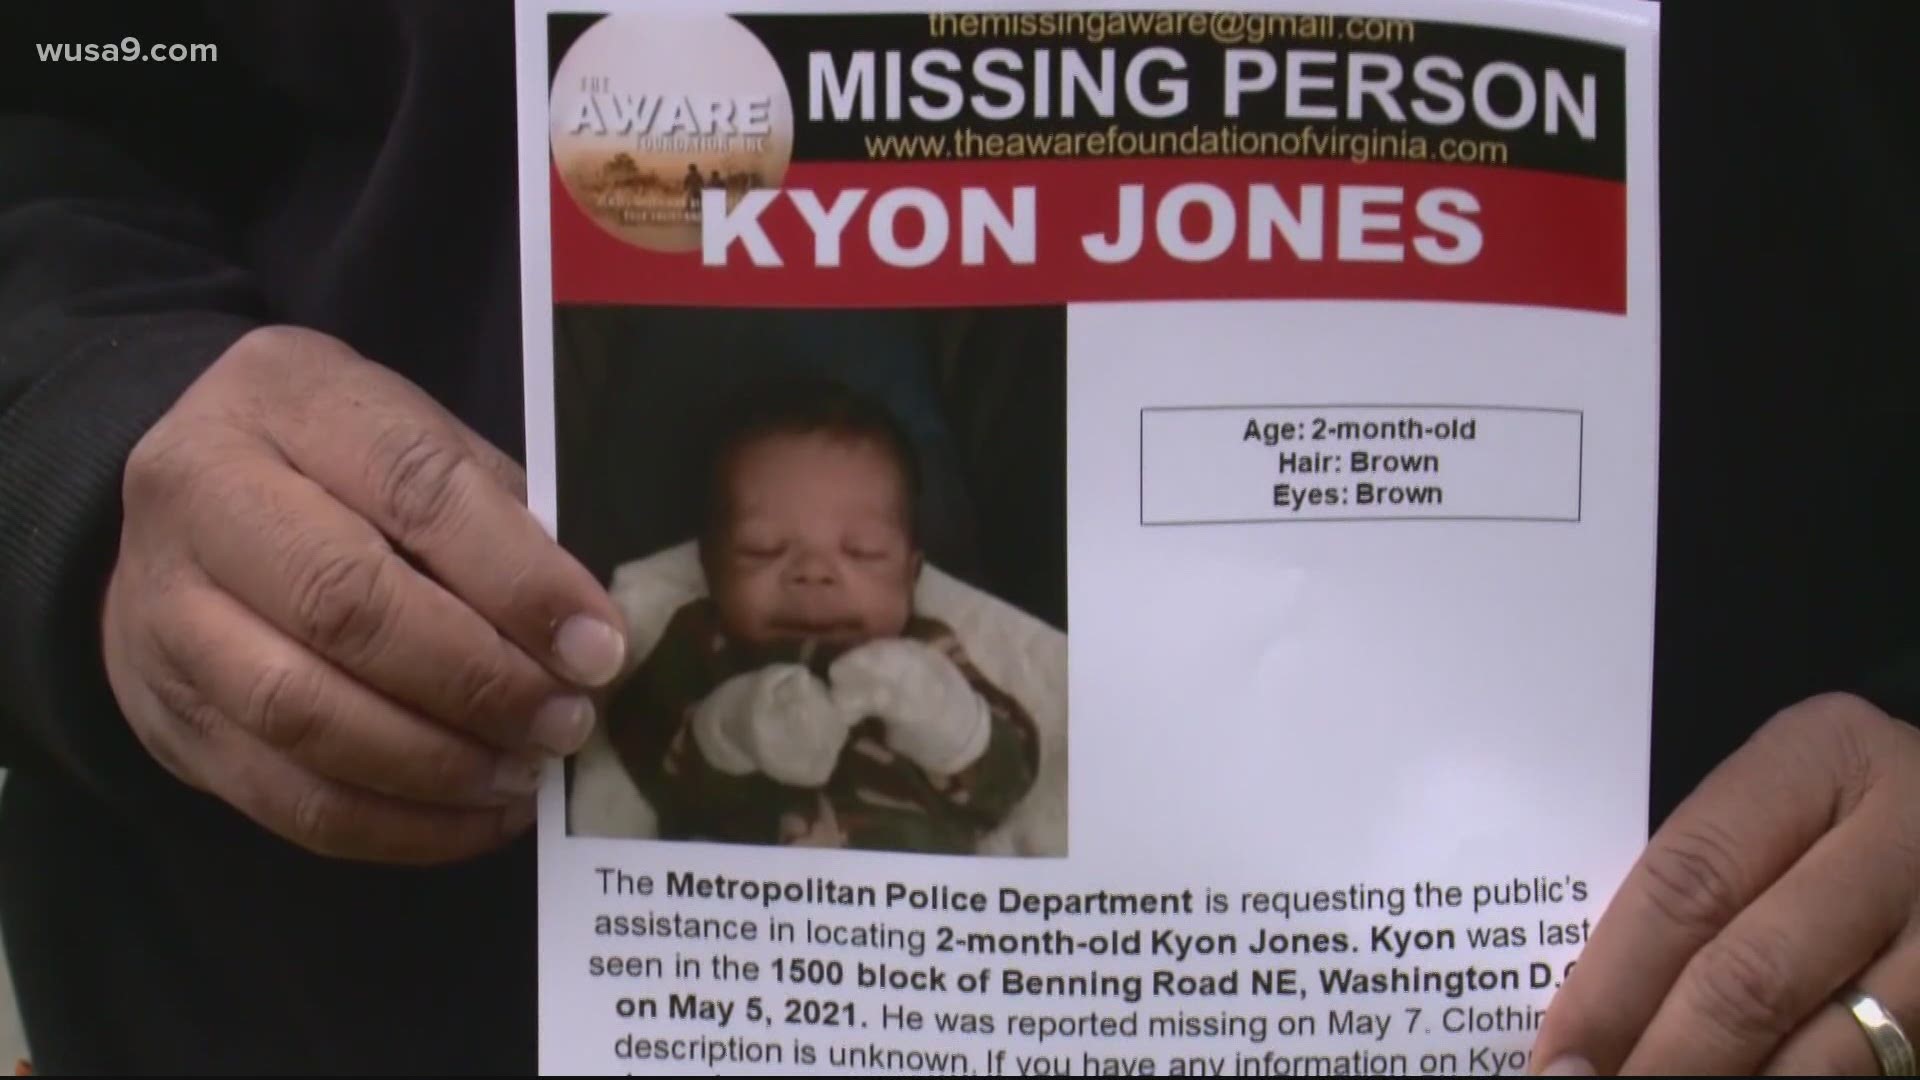 Kyon Jones was last seen in the 1500 block of Benning Road, NE on Wednesday, May 5, according to DC Police.